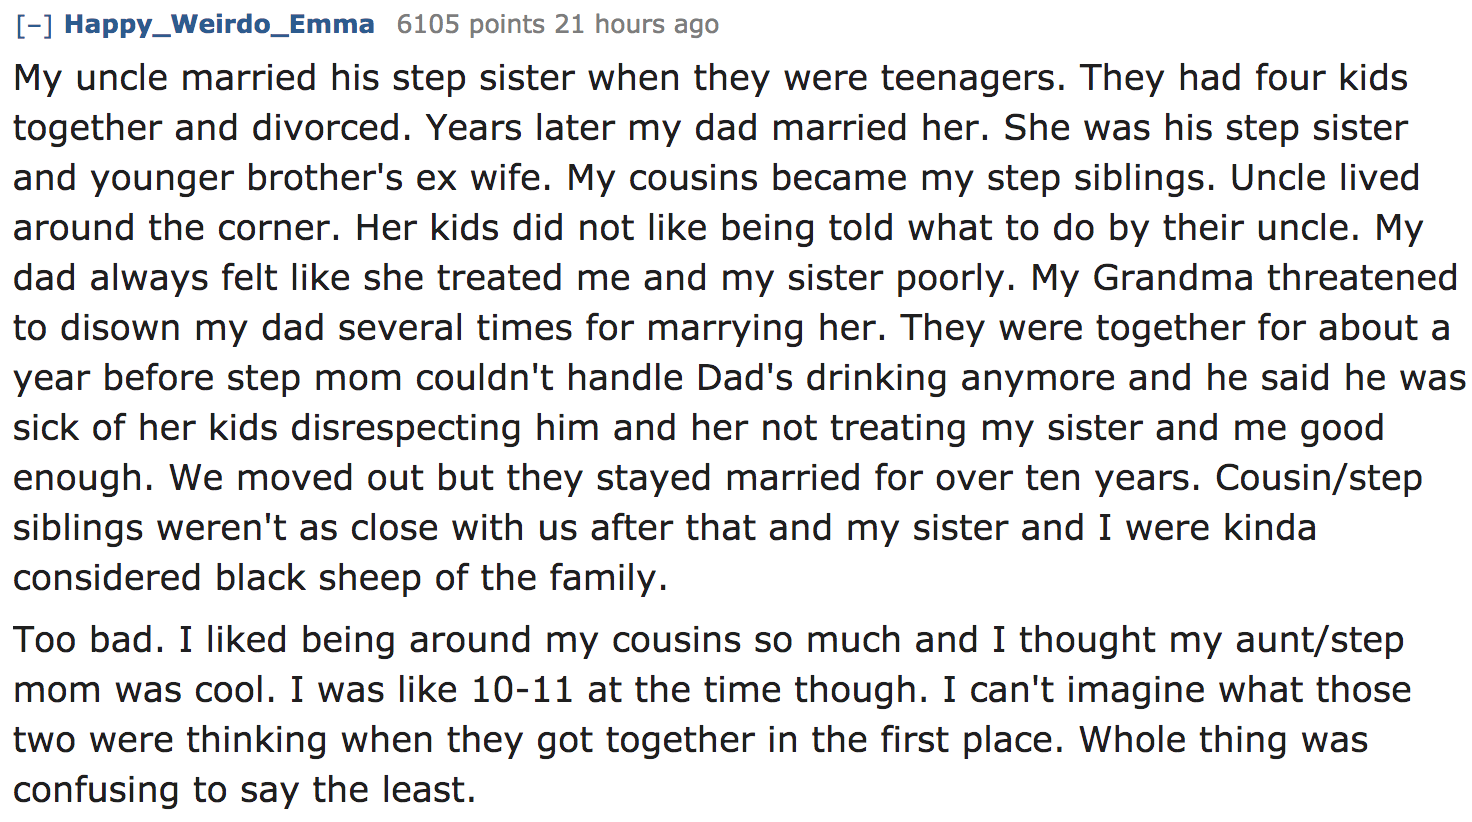 ask reddit - My uncle married his step sister when they were teenagers. They had four kids together and divorced. Years later my dad married her. She was his step sister and younger brother's ex wife. My cousins became my step…